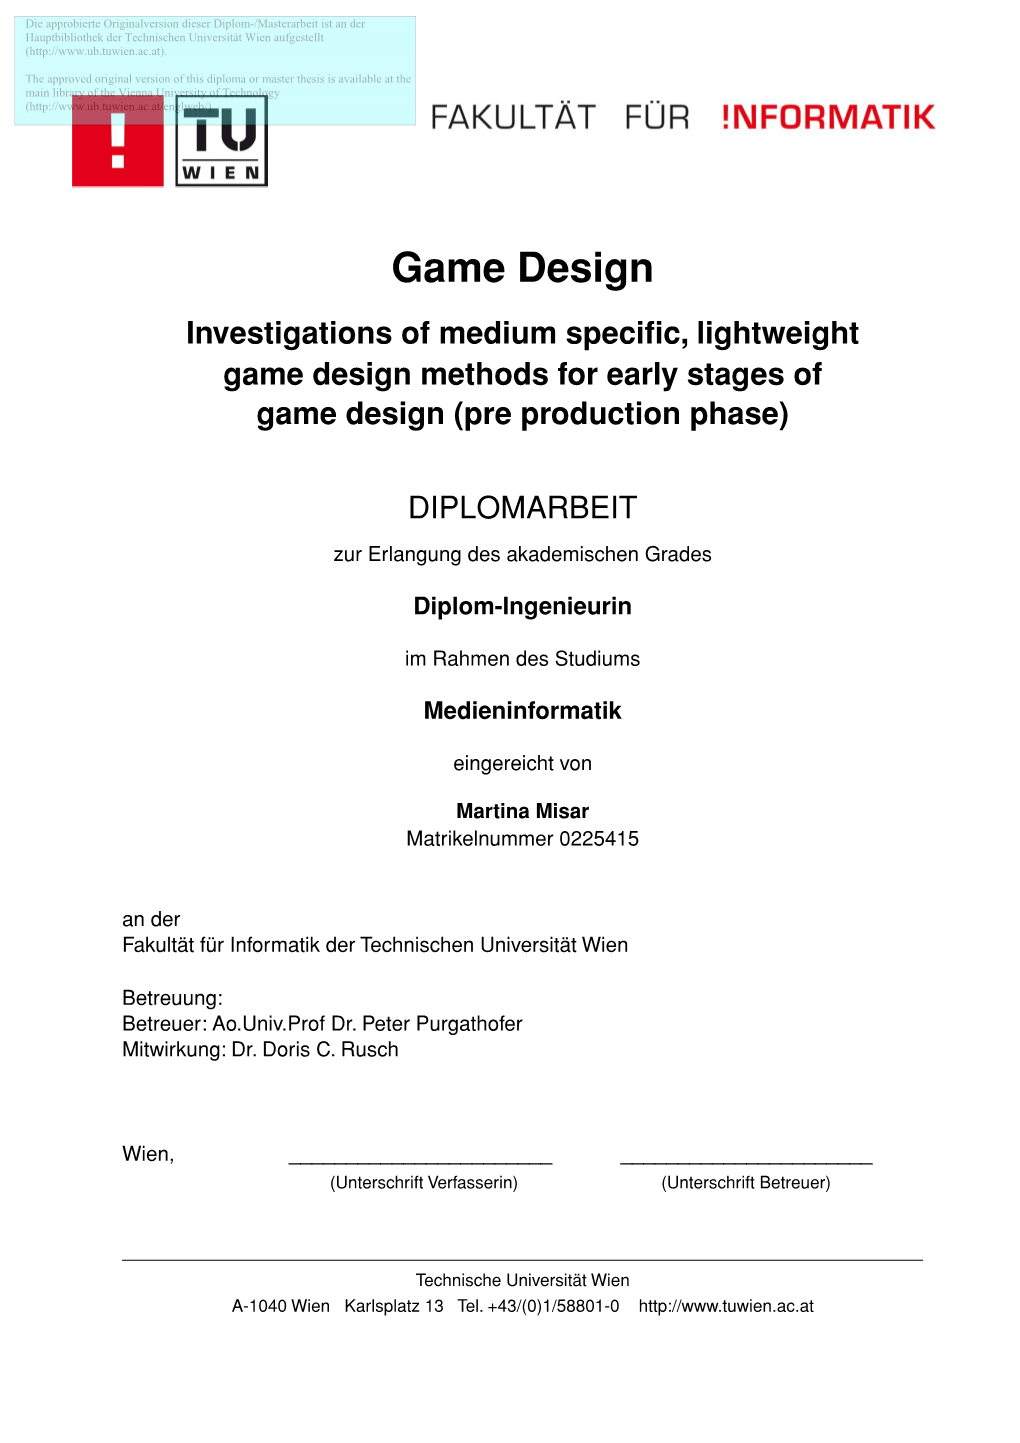 Game Design Investigations of Medium Specific, Lightweight Game Design Methods for Early Stages of Game Design (Pre Production Phase)